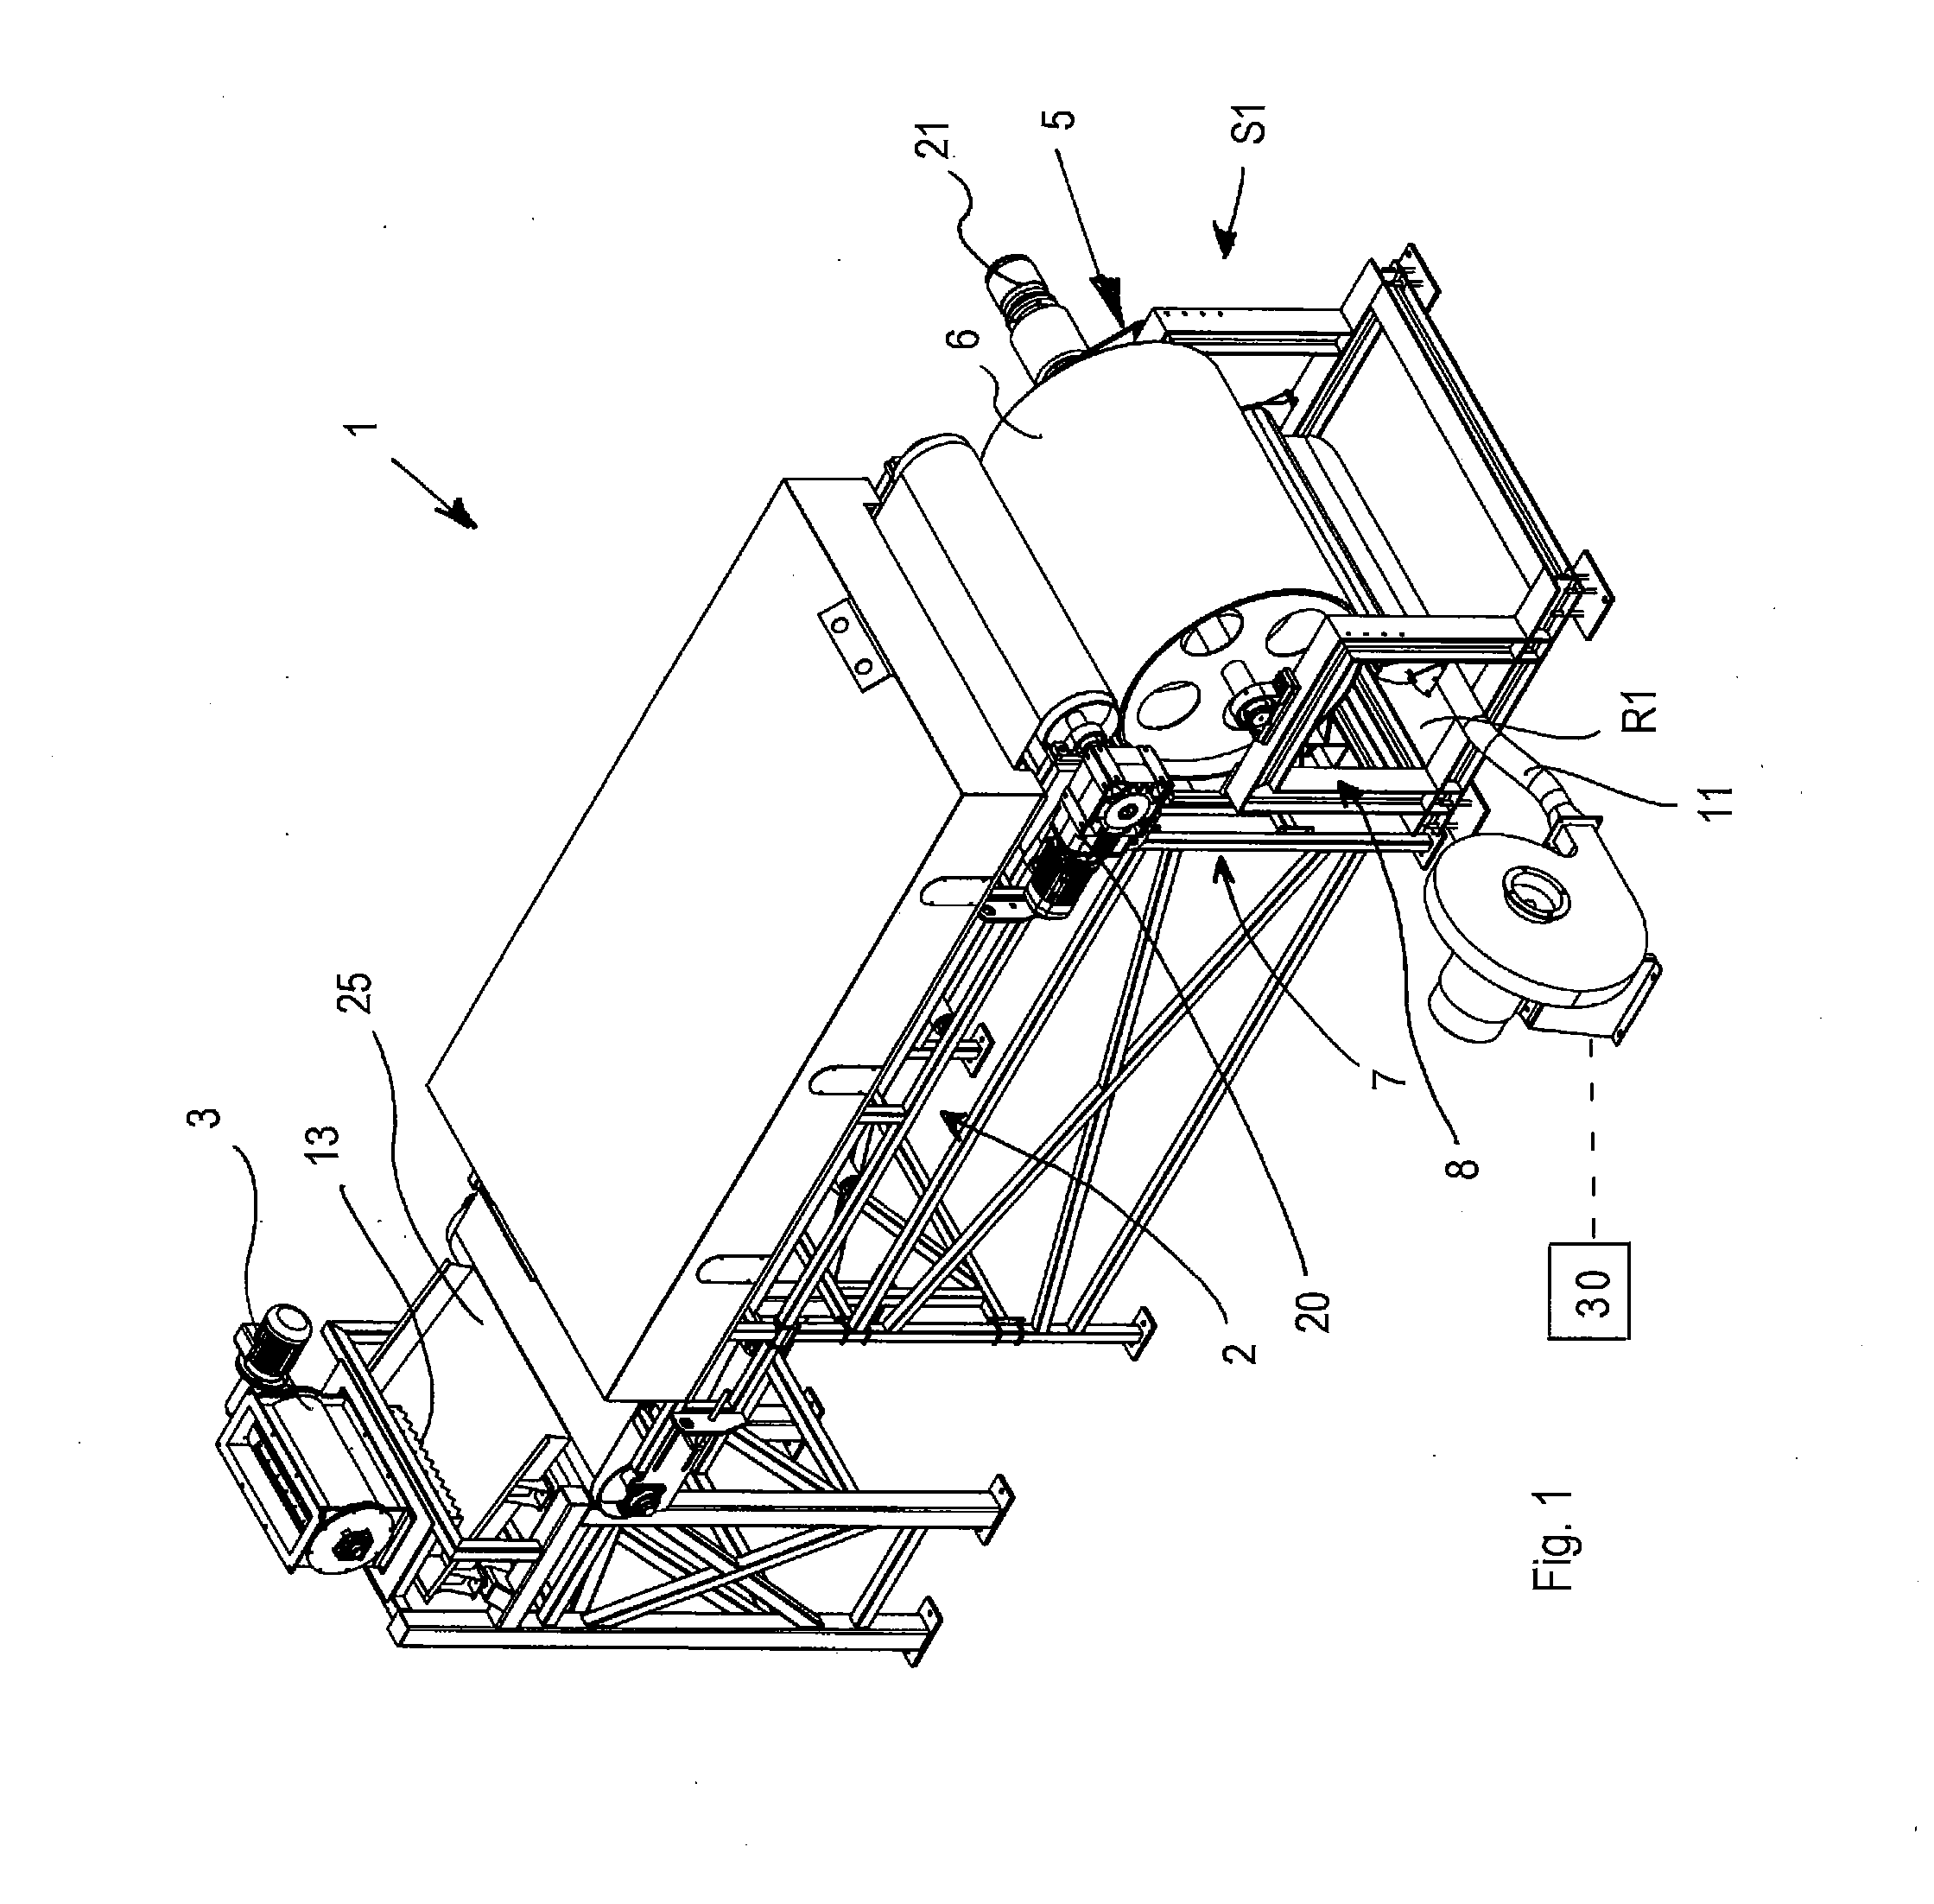 Apparatus and method for separating materials of various type